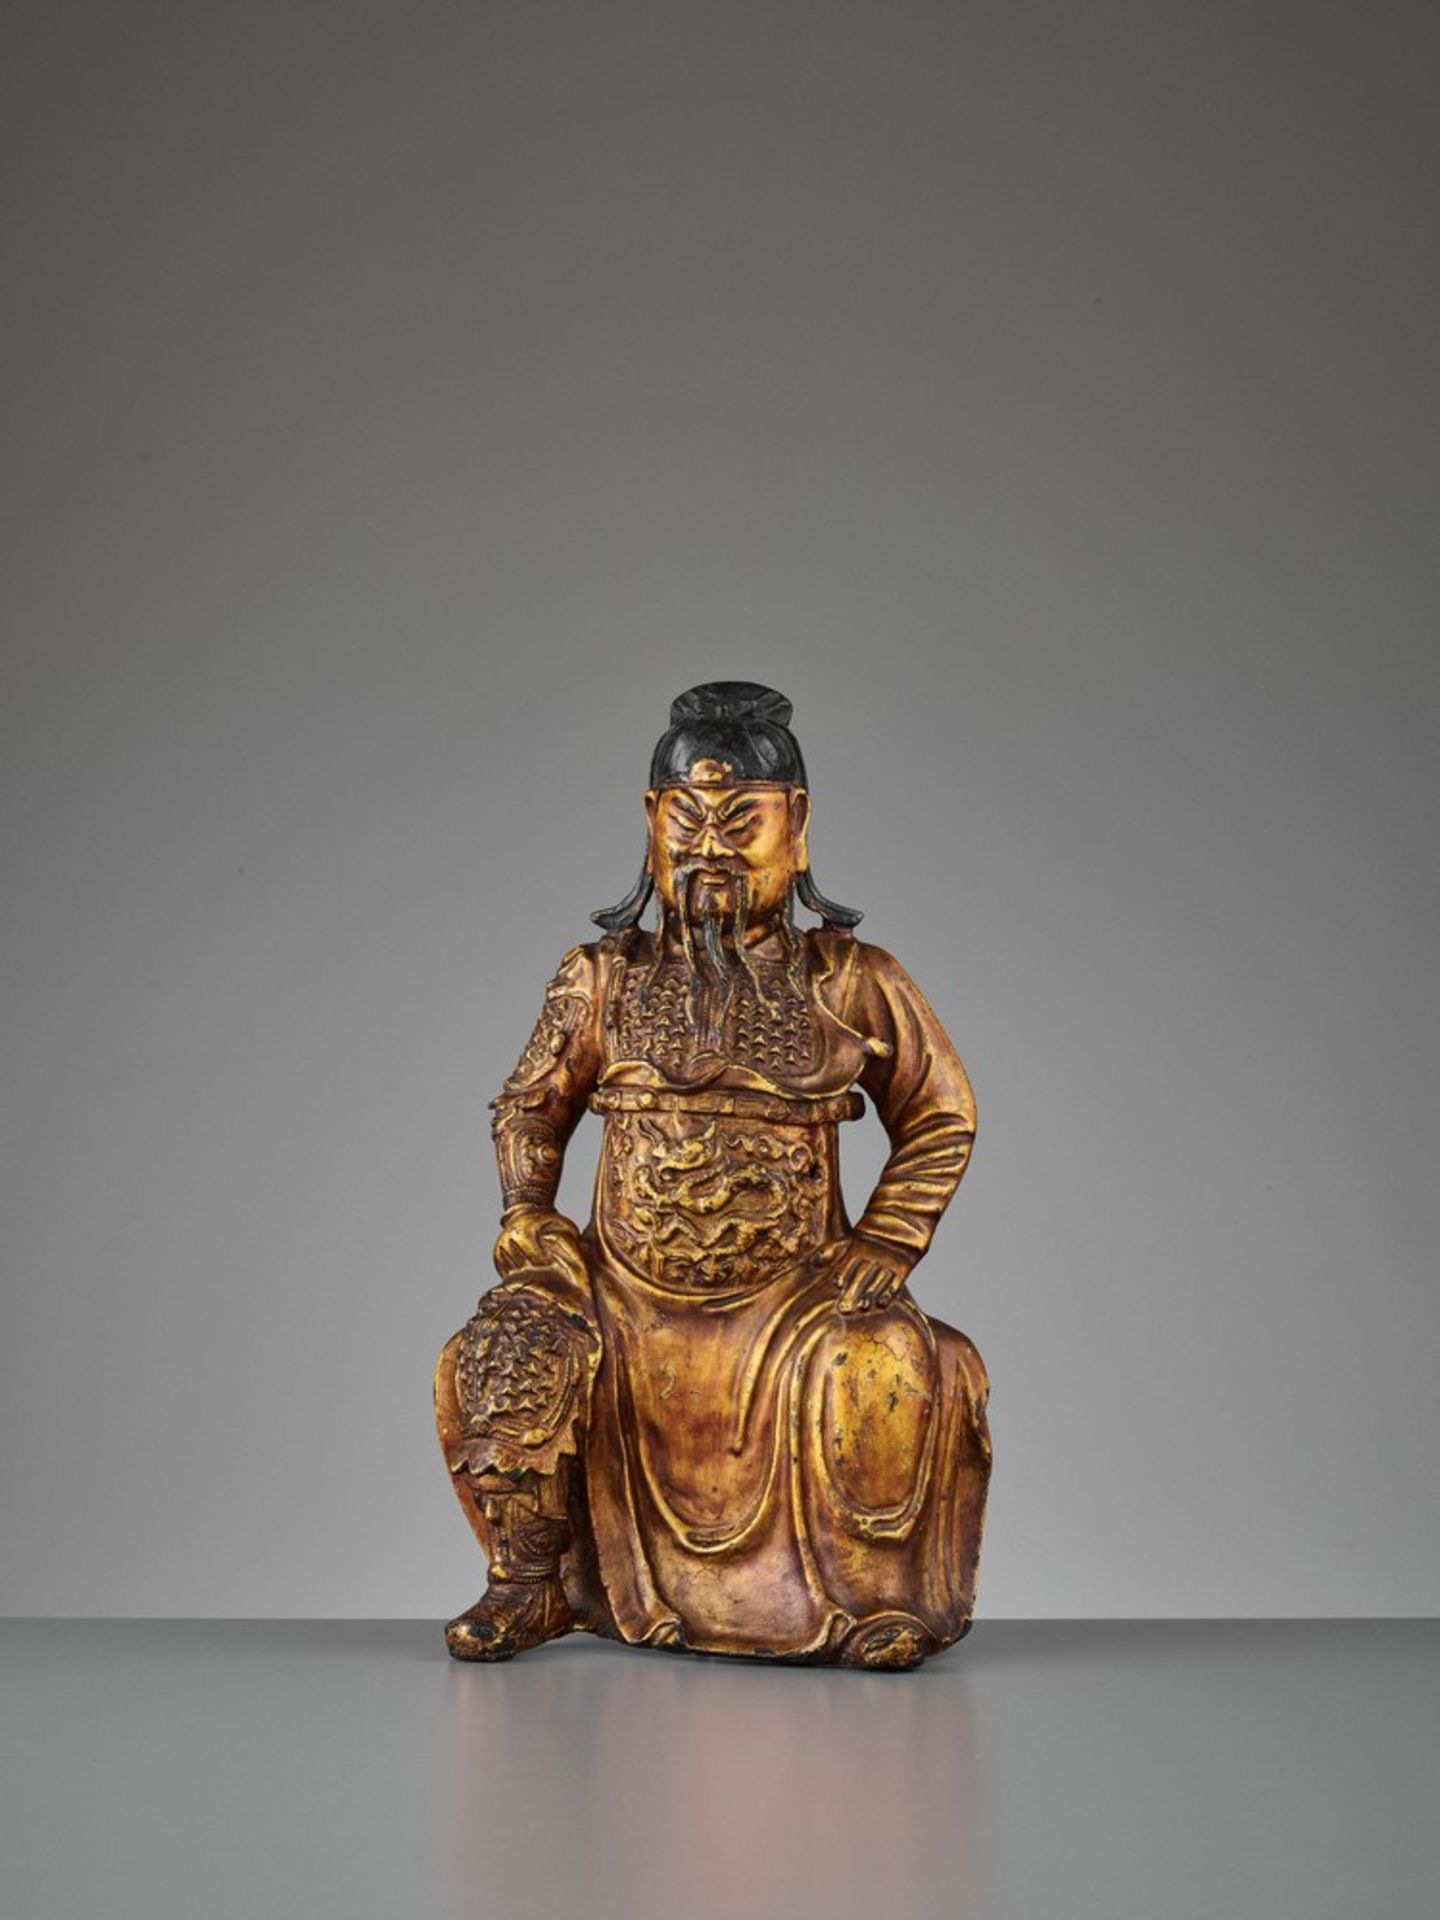 A LACQUER-GILT BRONZE FIGURE OF GUANDI, MING DYNASTY